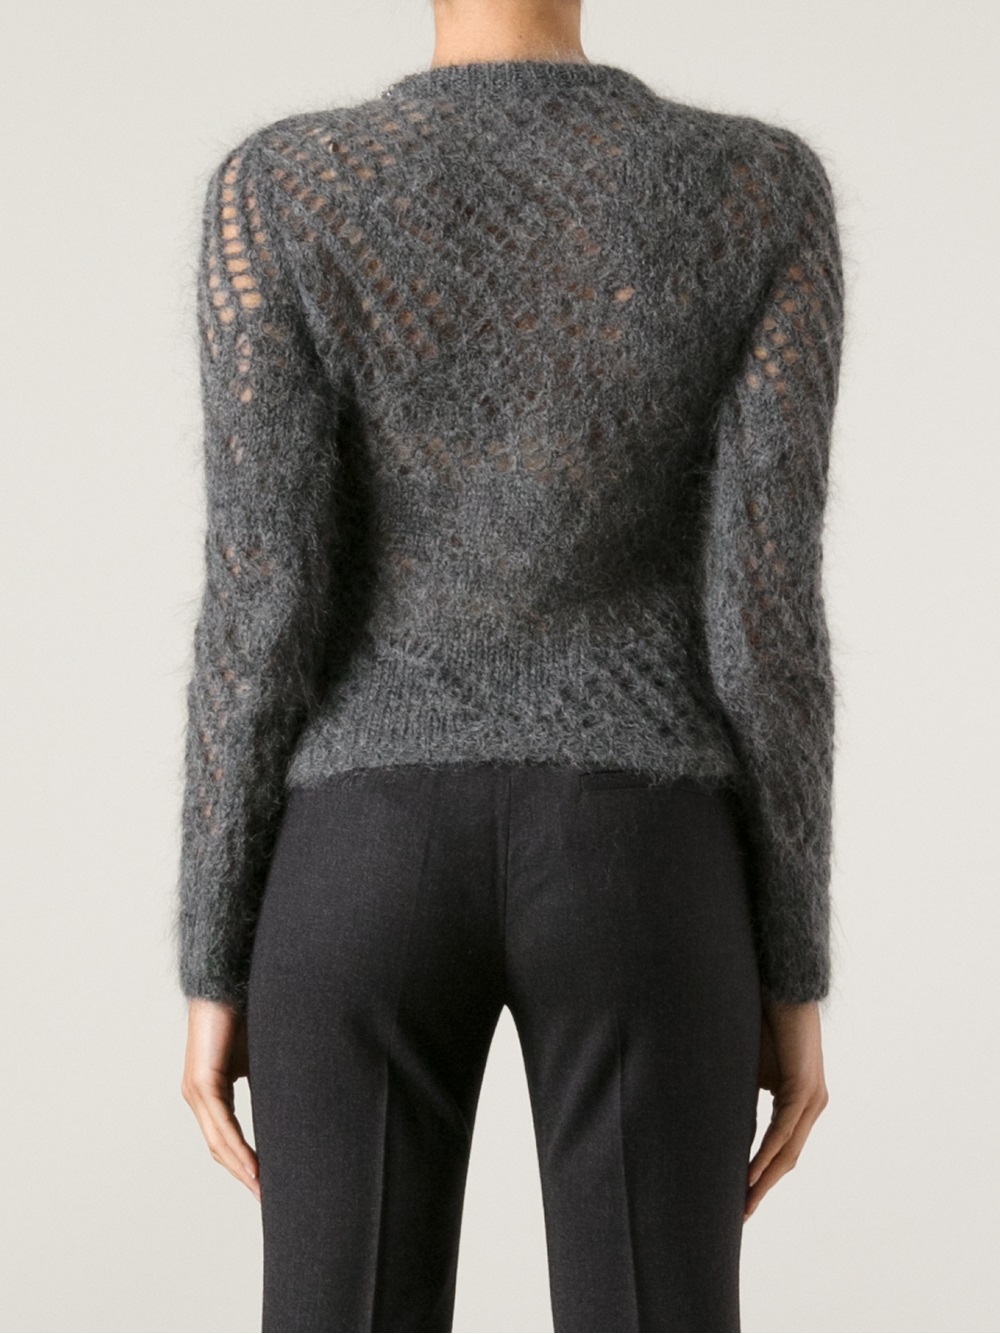 Ermanno Scervino Loose Knit Sweater in Grey (Gray) - Lyst